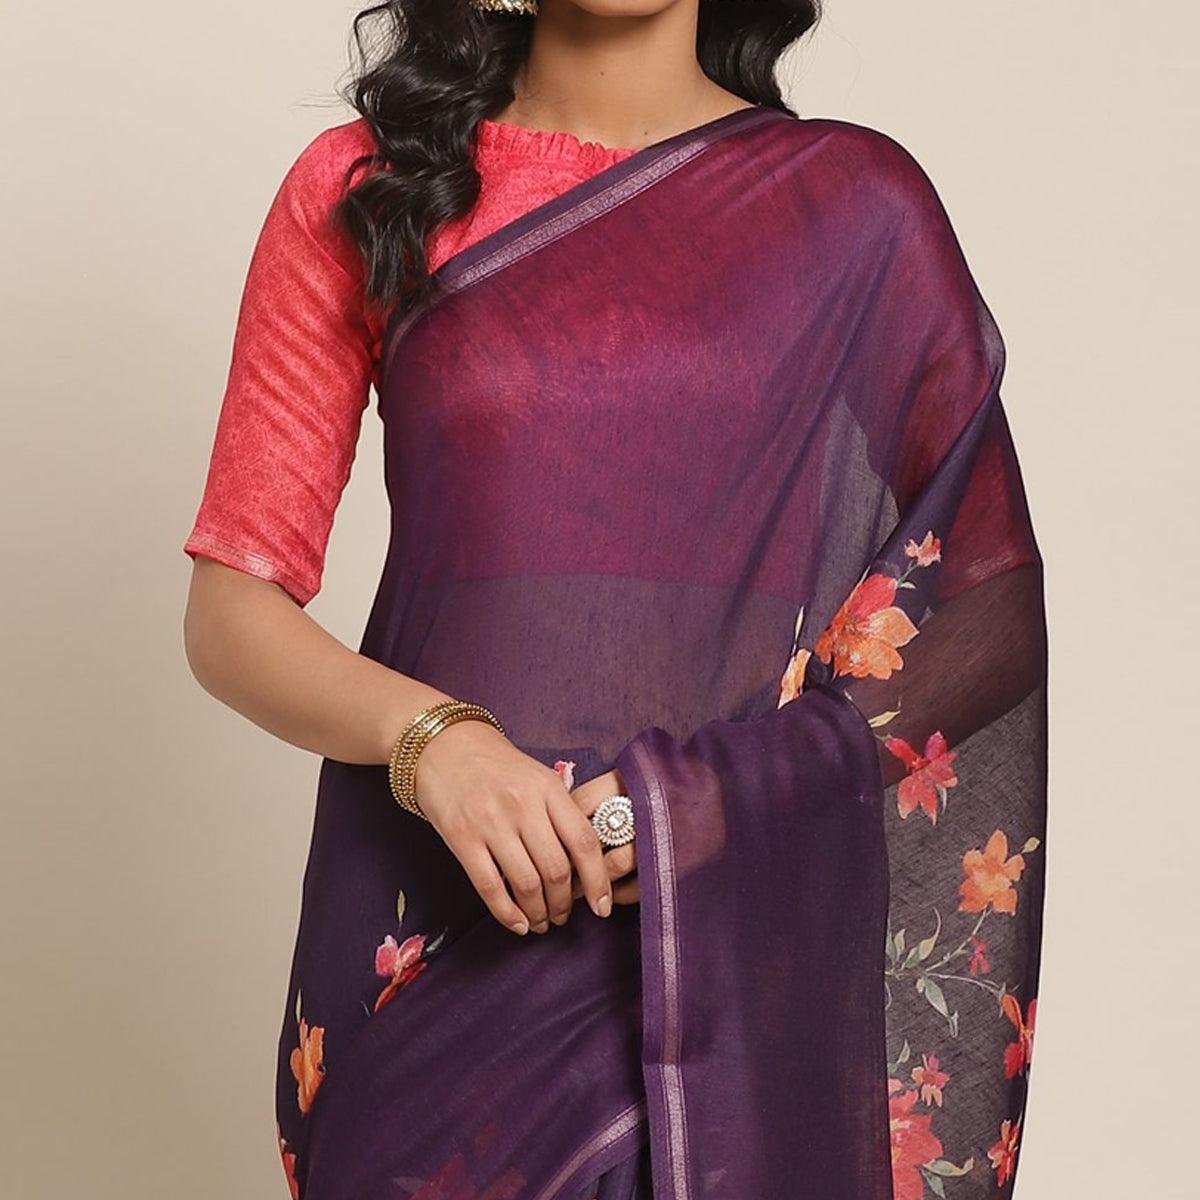 Energetic Violet Colored Casual Wear Printed Cotton Blend Saree - Peachmode